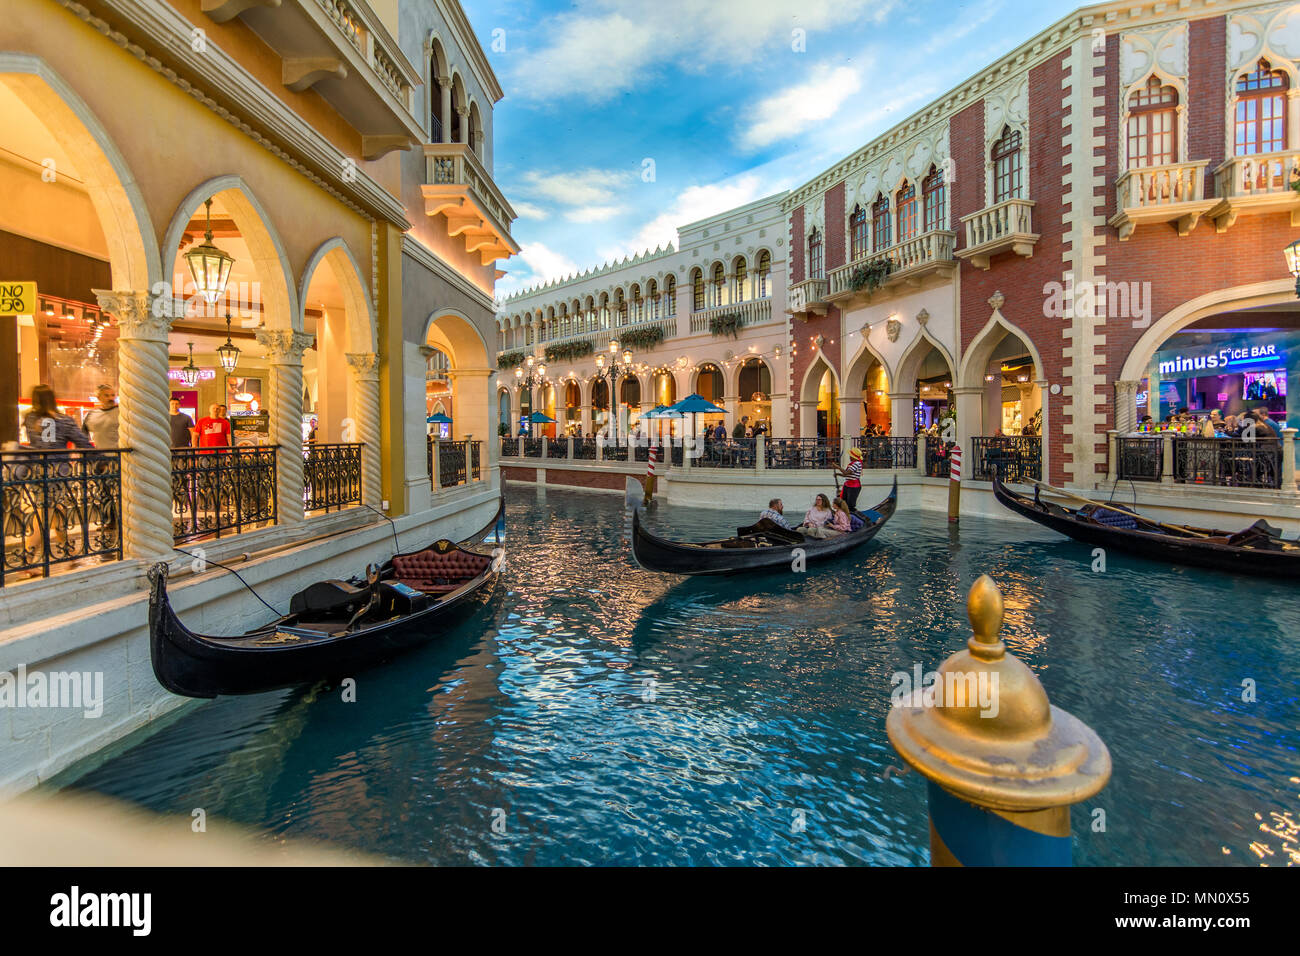 Las Vegas, US - April 27, 2018: Tourists visting the famous Venician hotel and indoor canals with gondolas in Las Vegas Stock Photo